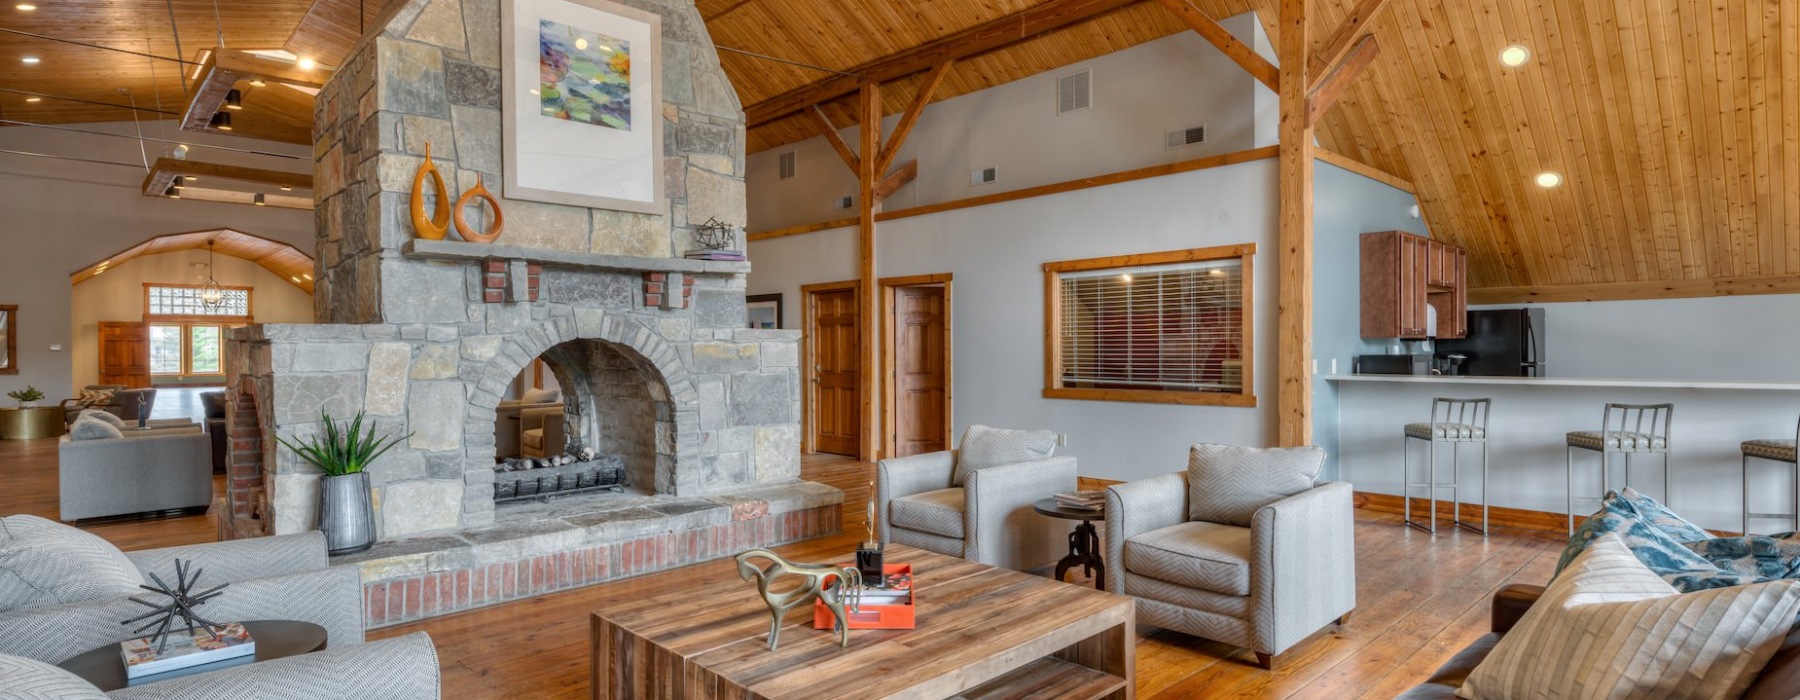 Lodge-style clubhouse with wood ceilings and a fireplace